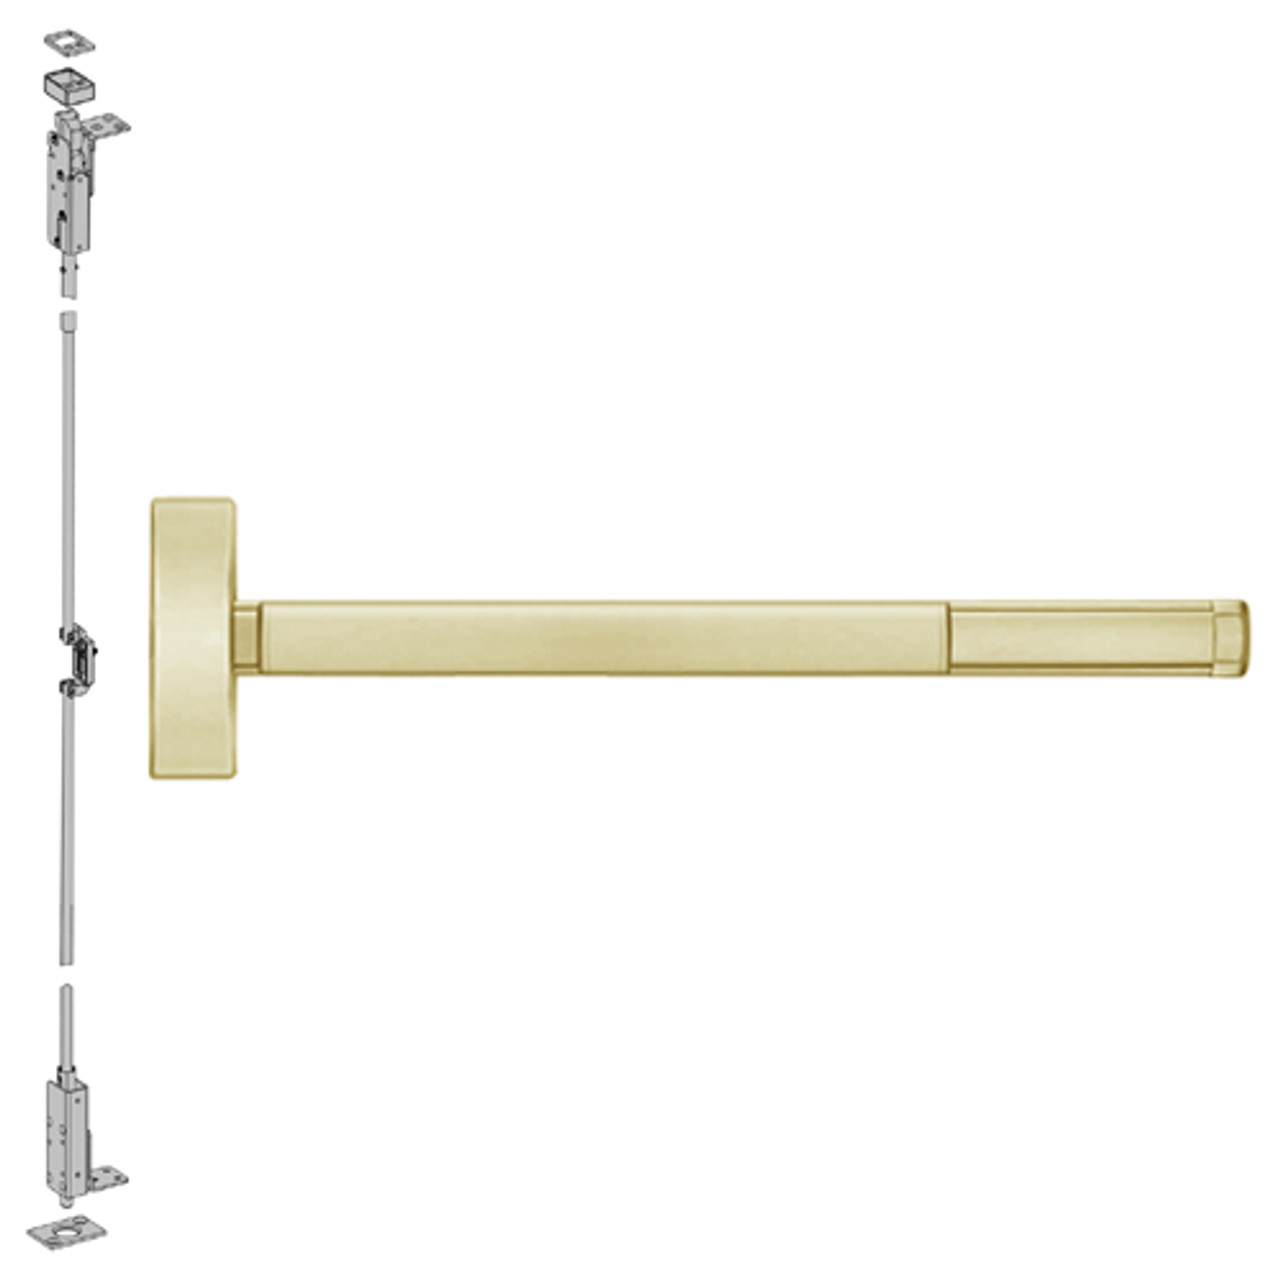 ELR2703LBR-606-48 PHI 2700 Series Wood Door Concealed Vertical Exit Device with Electric Latch Retraction Prepped for Key Retracts Latchbolt in Satin Brass Finish